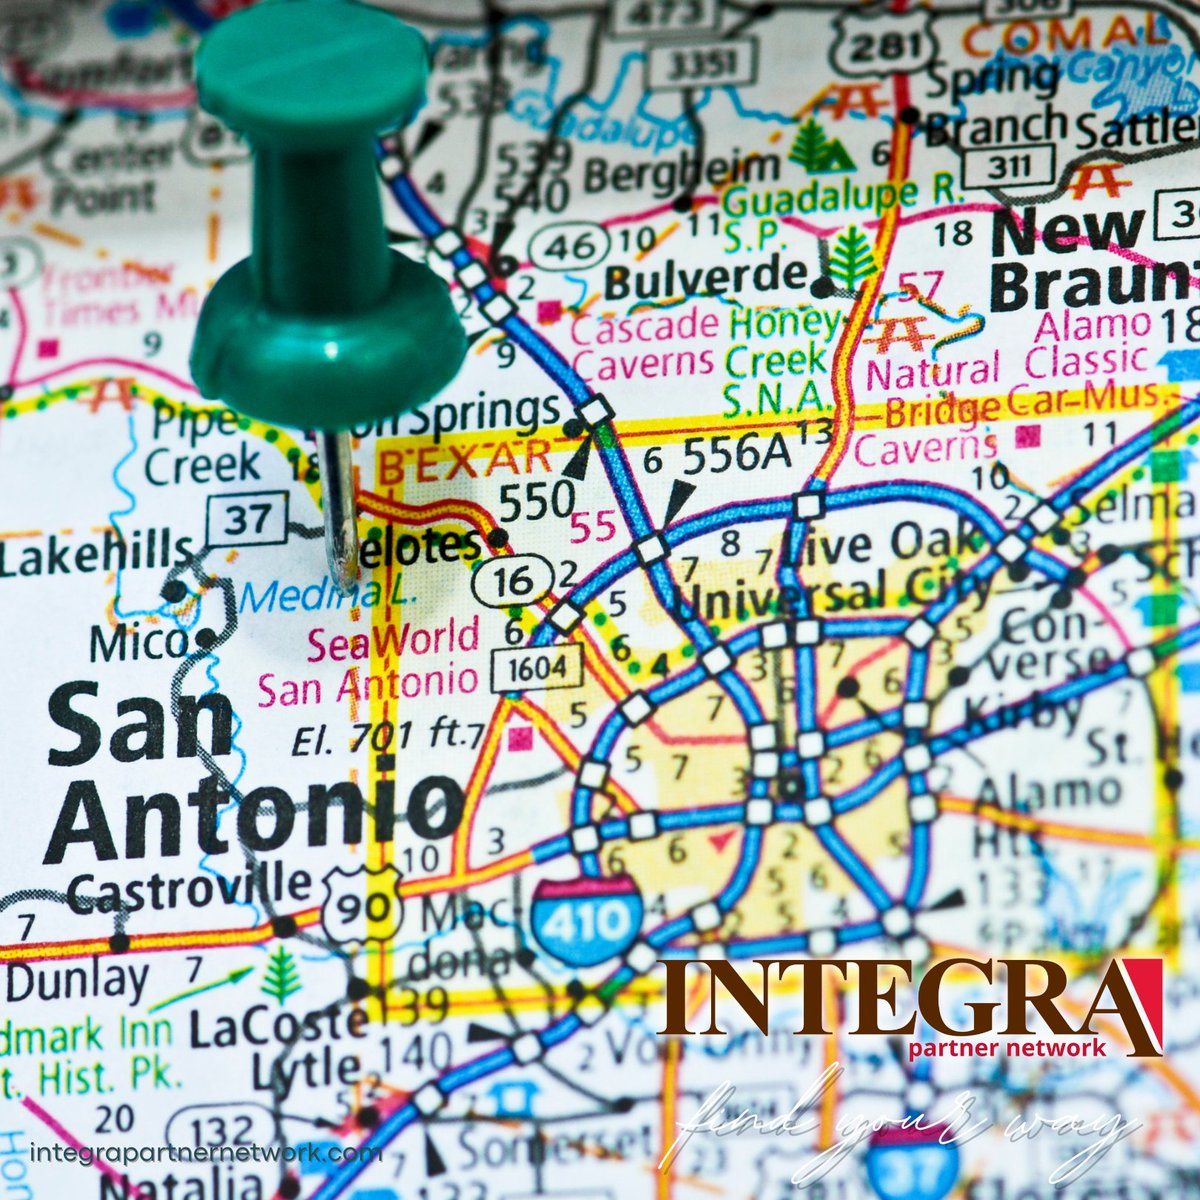 No matter where you are in Texas, you’re never far from success with the Integra Partner Network. Find your way as an independent agent with Integra.
#independentagent #insurance #independentagency #integra #integrapartnernetwork #insuranceagent #insuranceagency #entrepreneur #tx